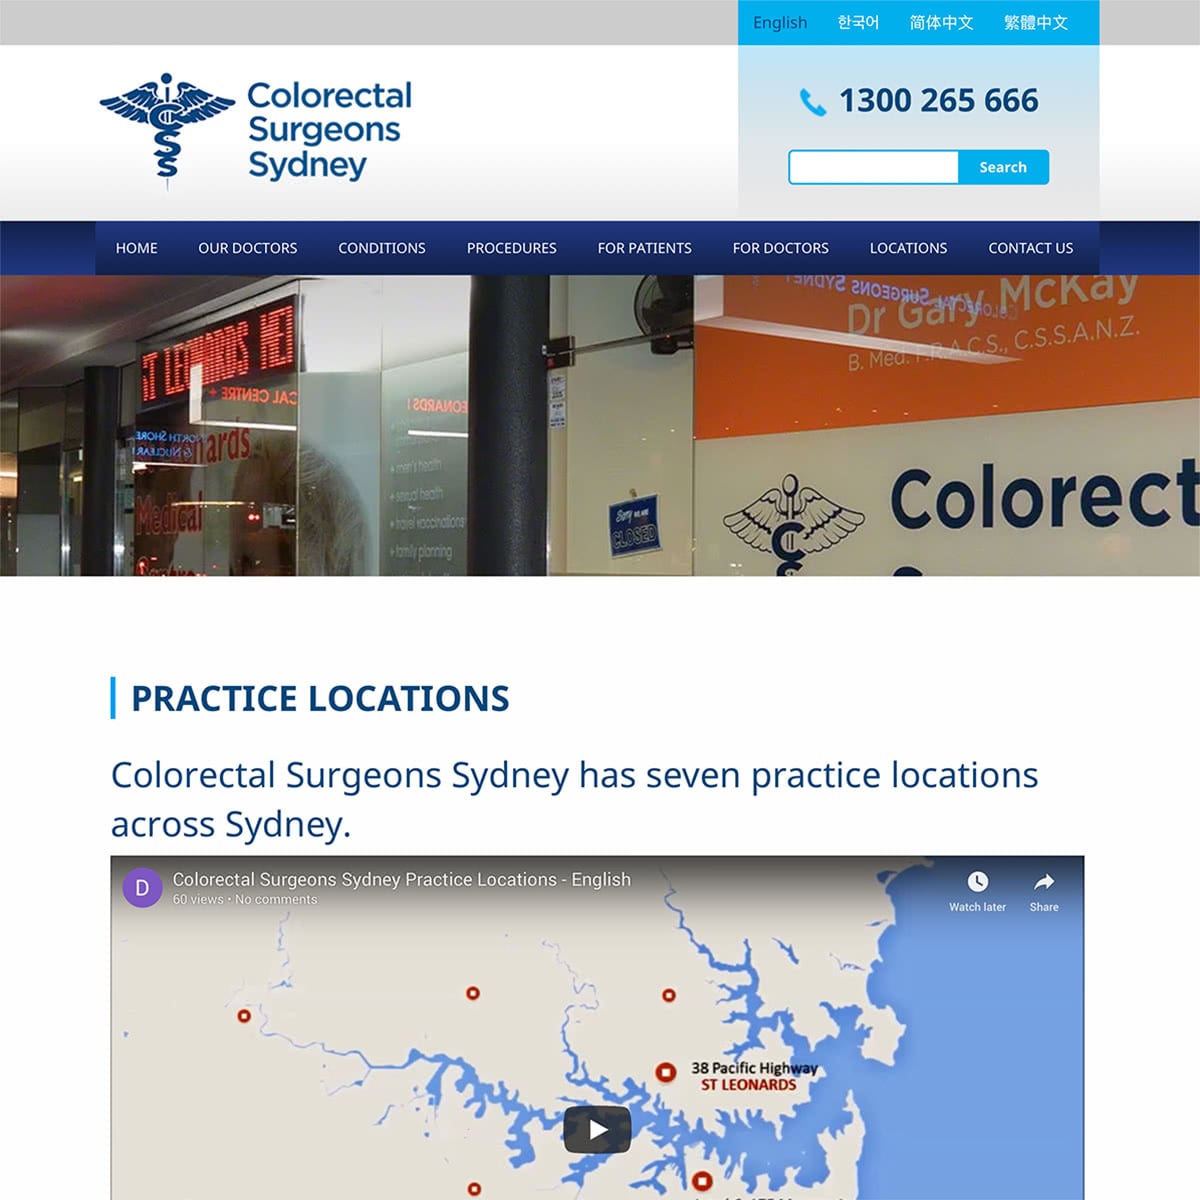 Practice locations - showing multi-lingual video and accordion style sections for each location